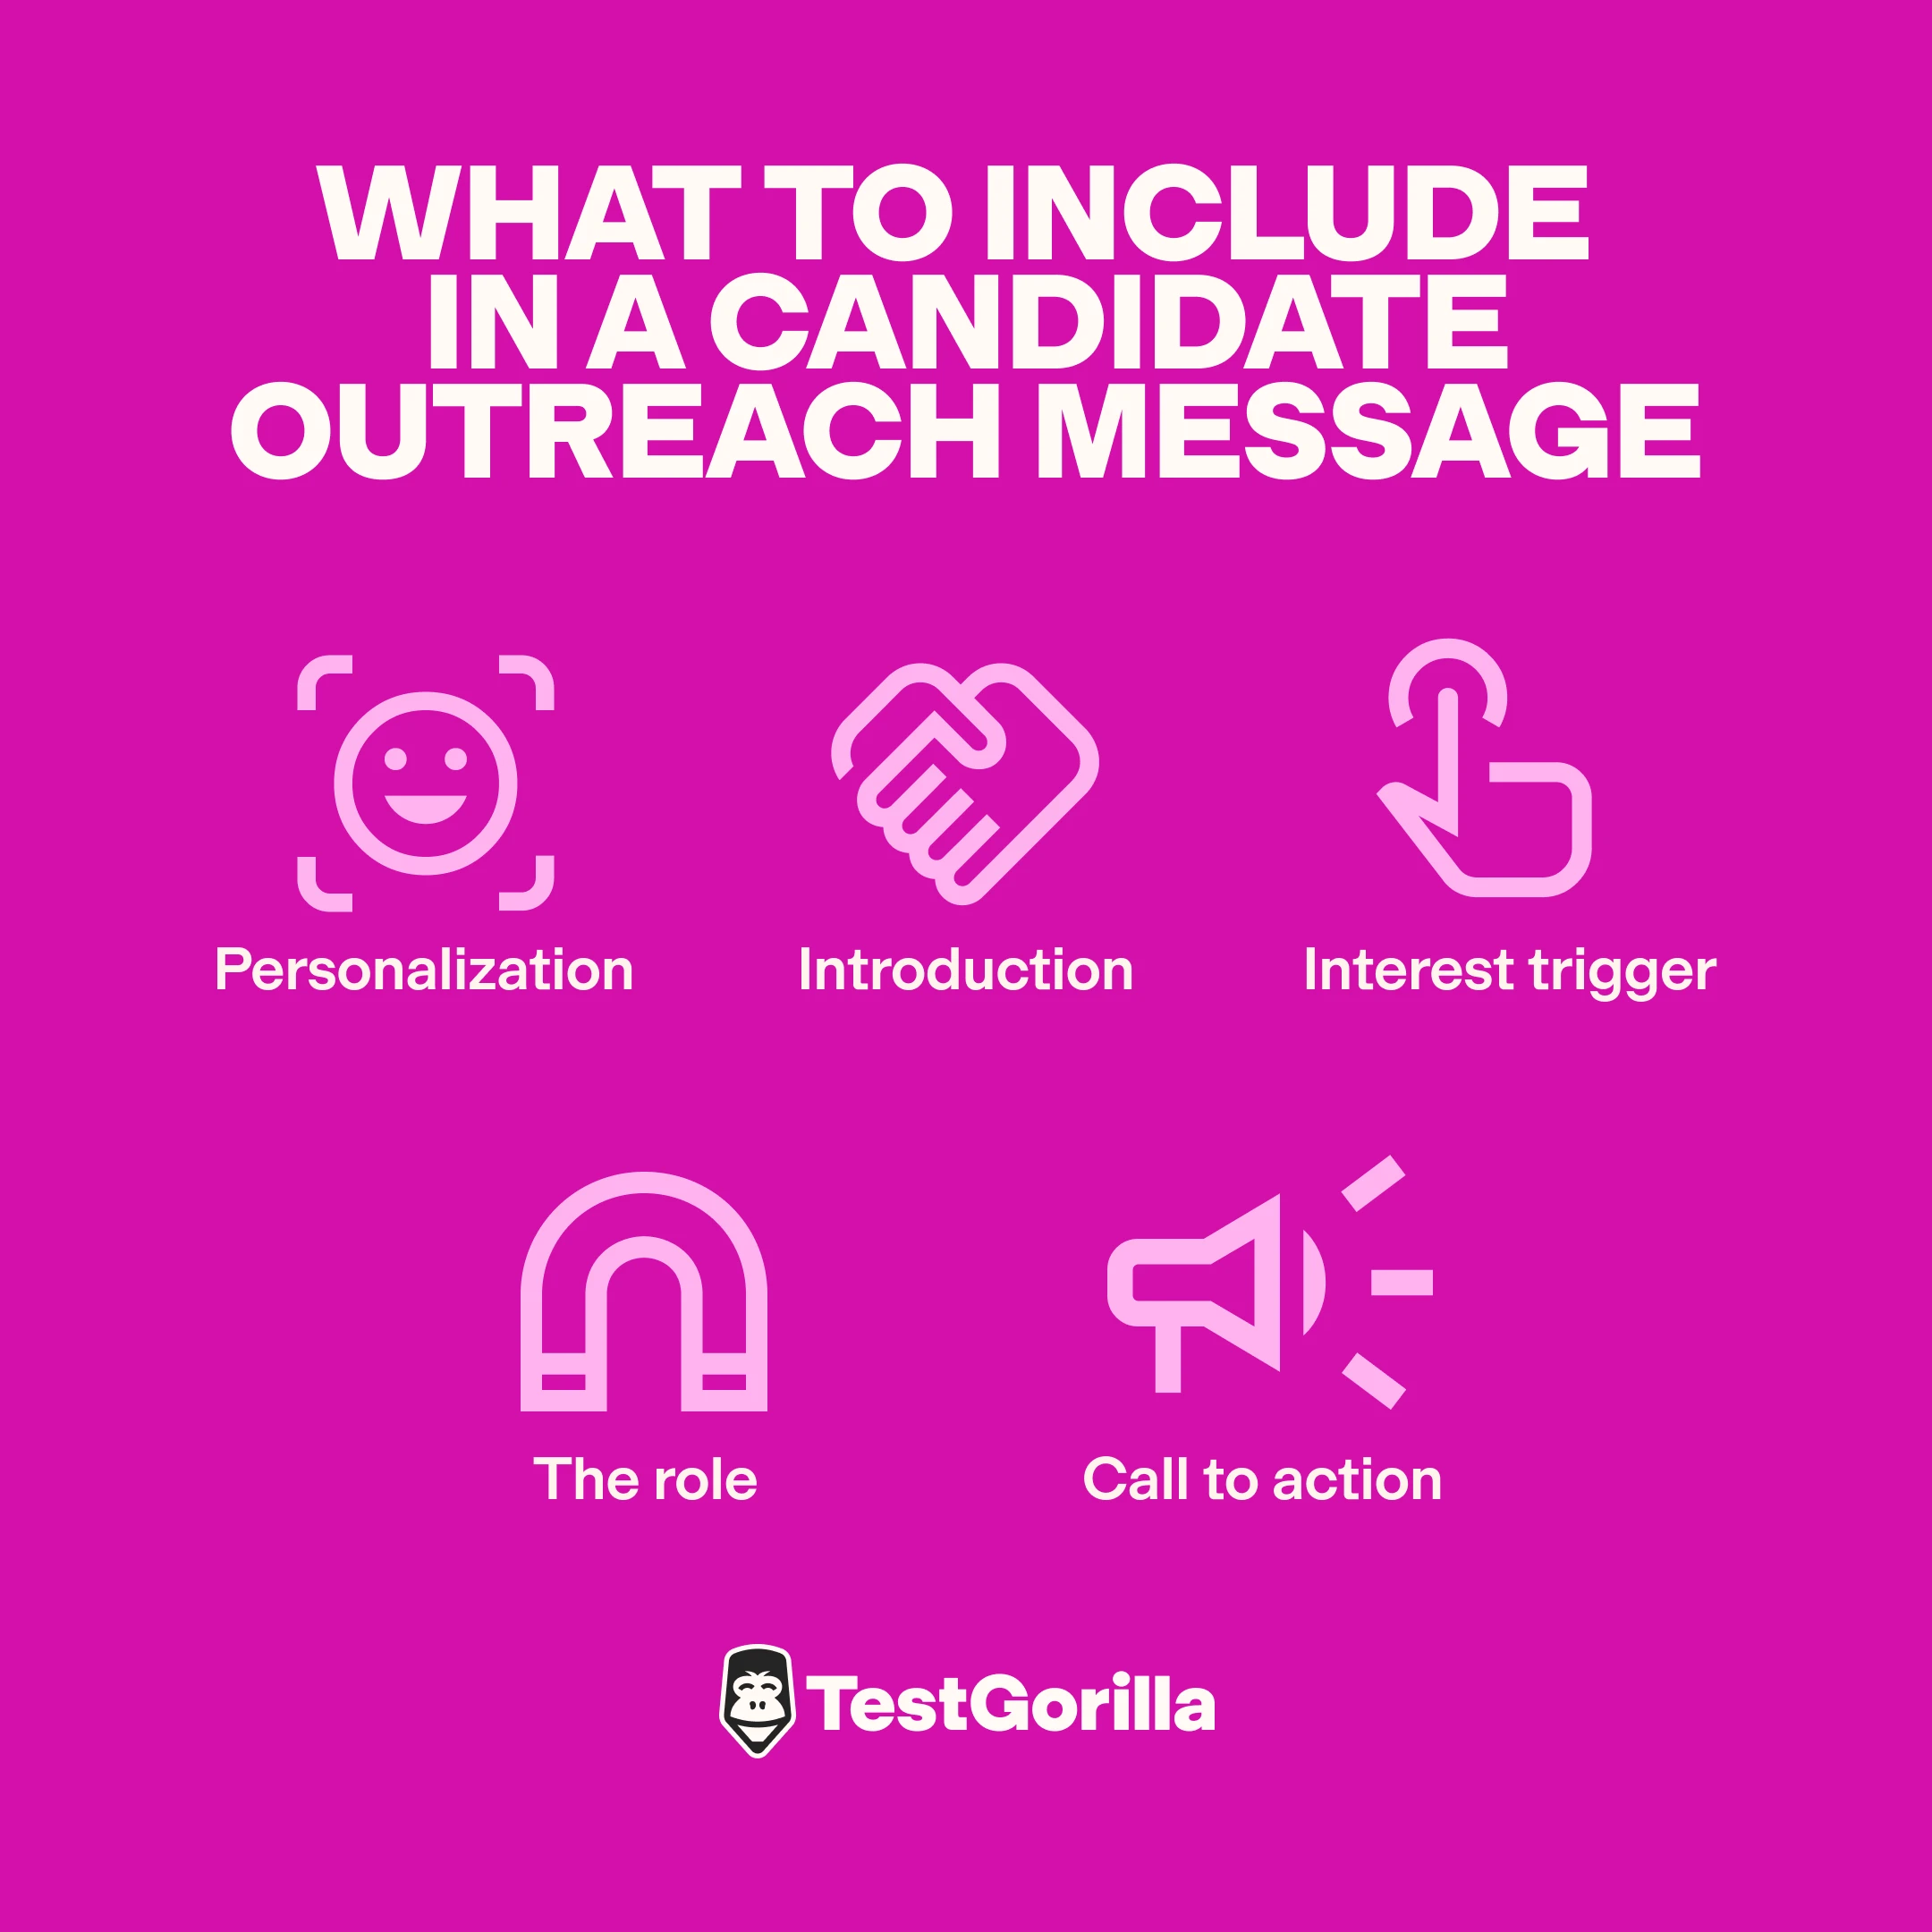 image showing what to include in a candidate outreach message